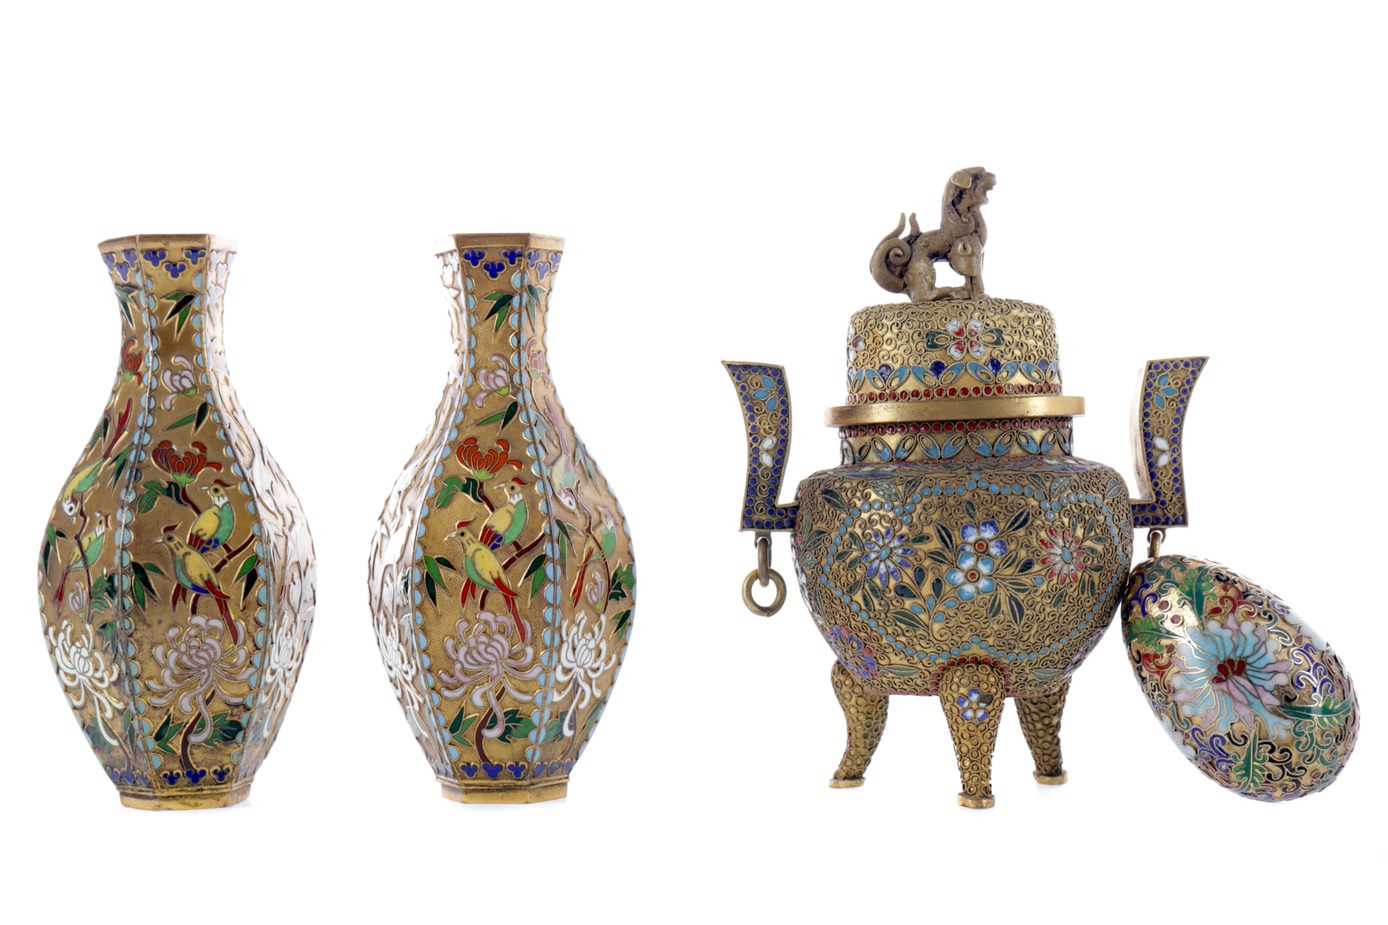 Lot 98 - A PAIR OF MID-20TH CENTURY CHINESE CLOISONNÉ VASES, ALONG WITH TWO CENSORS AND AN EGG